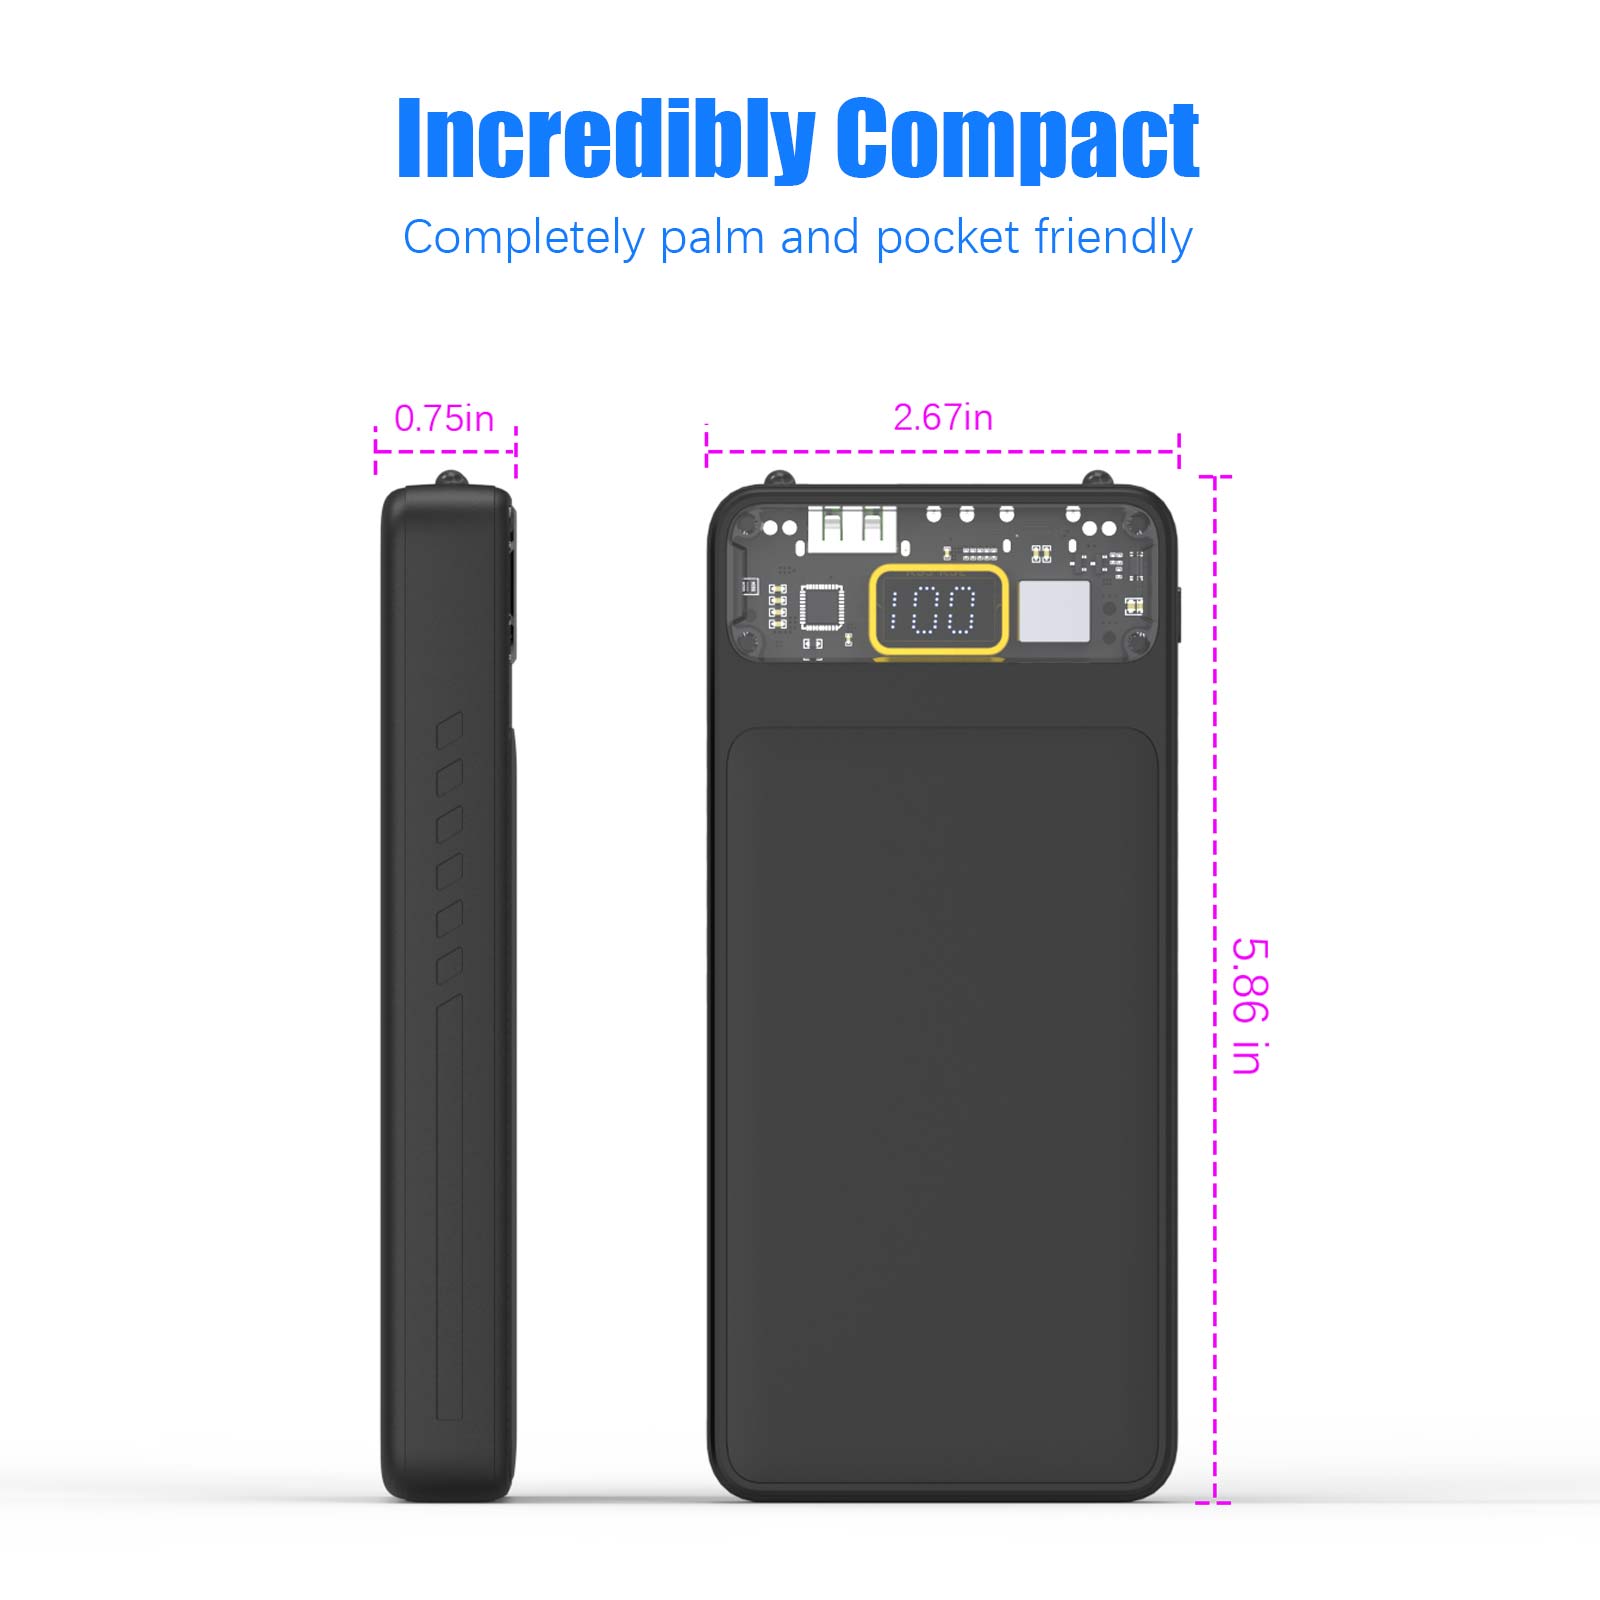 Flashlight Power Bank, Powerbank, 10000mAh Portable Charger with Built-in Cables, TYPE C Externer Akku For iphone, ipad, Samsung, Huawei, Smartphones etc.